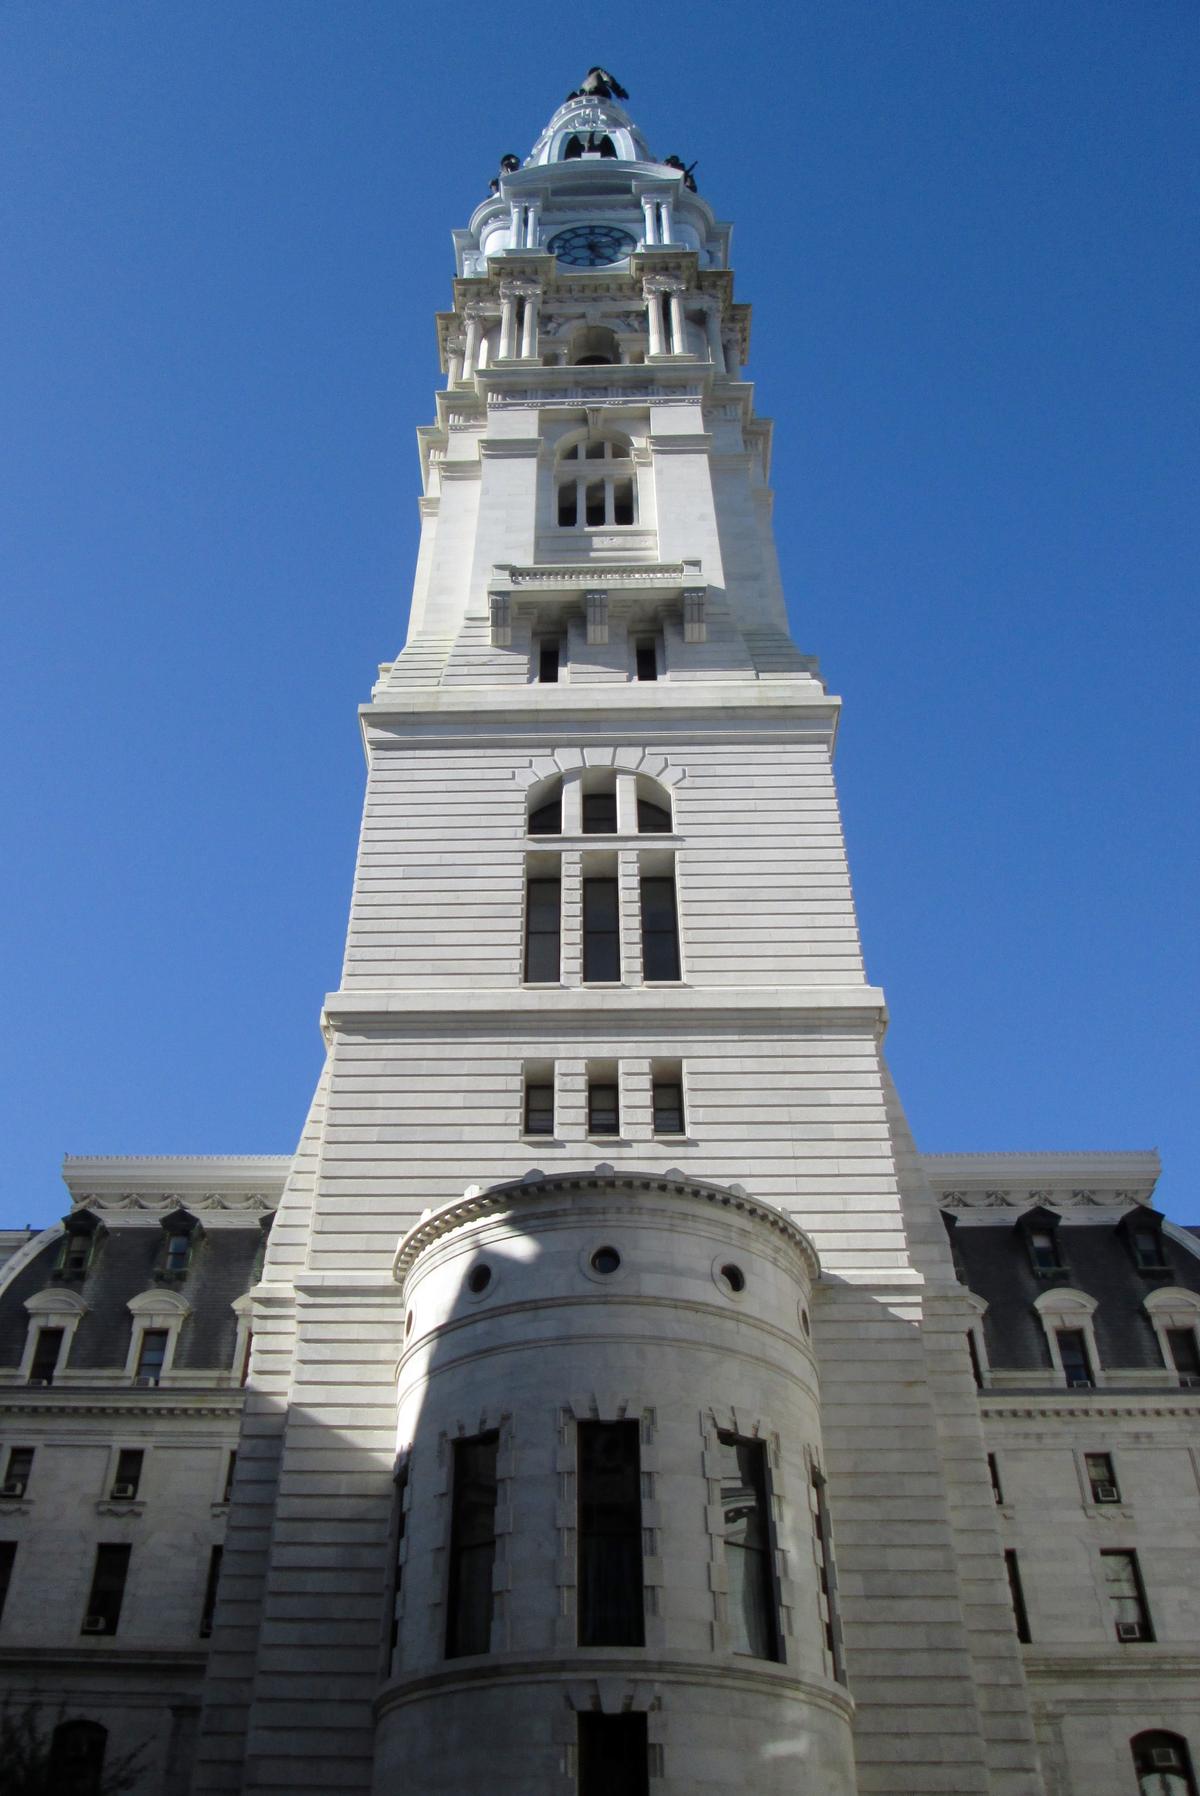 The most striking feature of the building is the large tower that rises high above the city floor. The body of the tower is restrained in comparison with the rest of the building. This leads the eye to the upper portions of the tower, where the columns, the large clocks, and an elongated dome form the pedestal for the statue of William Penn. (Beyond My Ken/CC BY-SA 4.0)